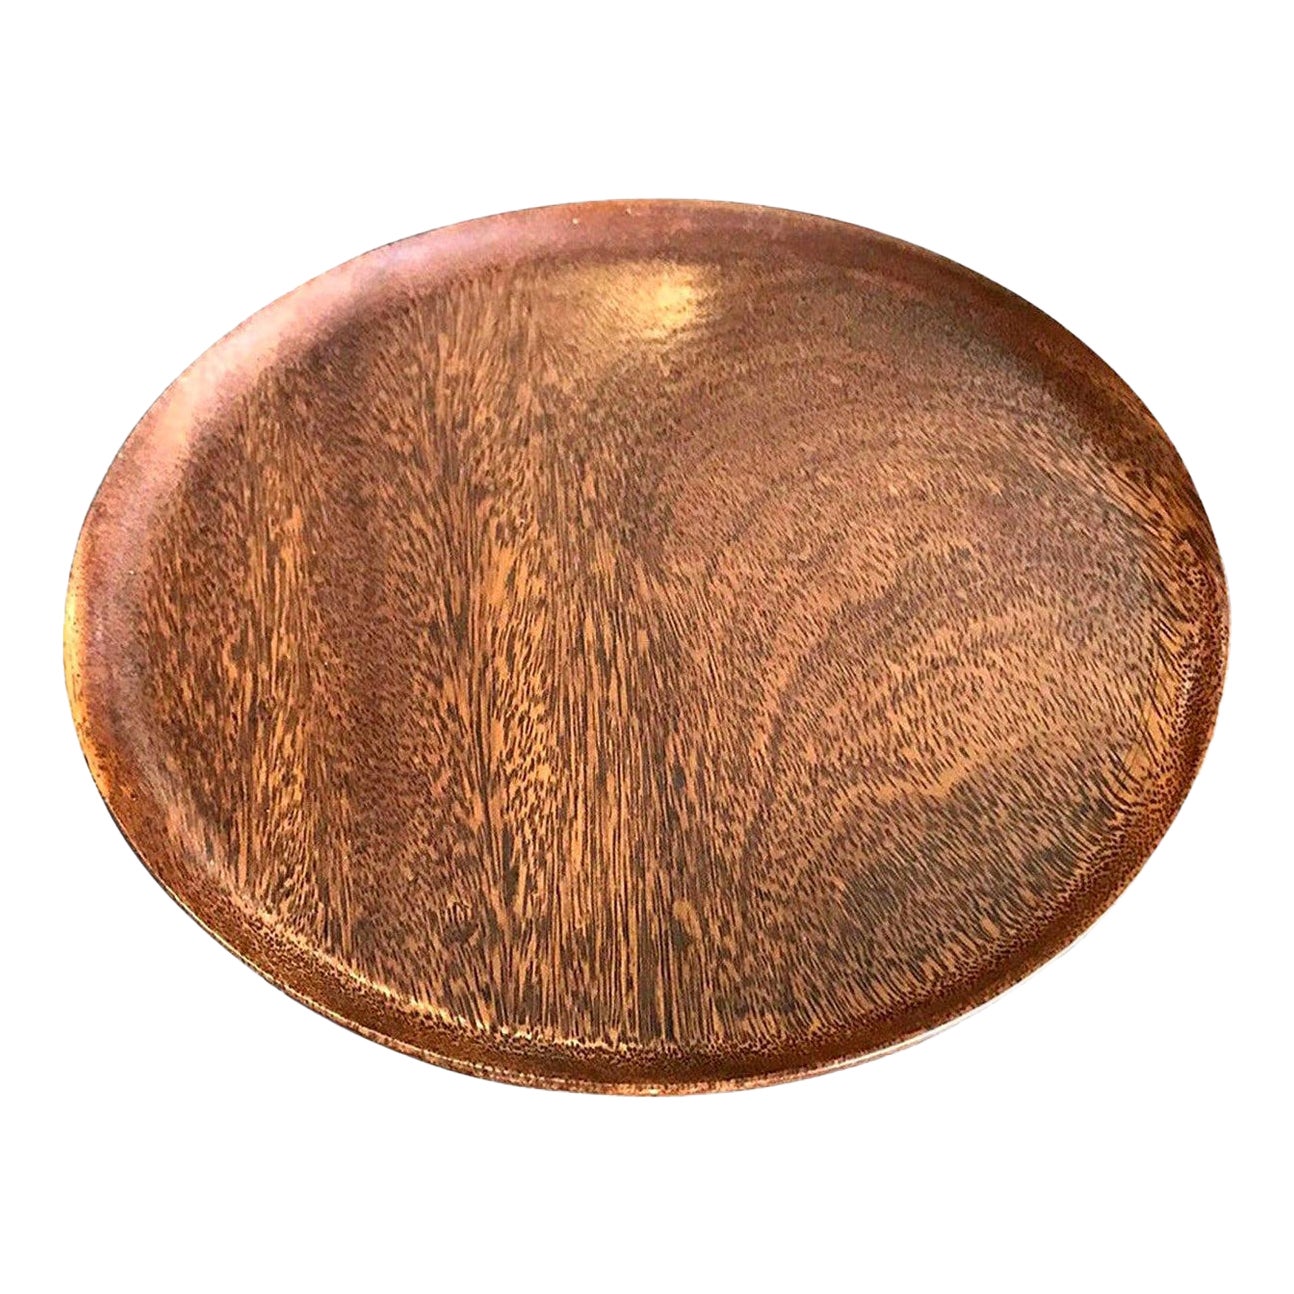 Bob Stocksdale Signed Mid-Century Modern Turned Exotic Wood Bowl Platter Plate For Sale